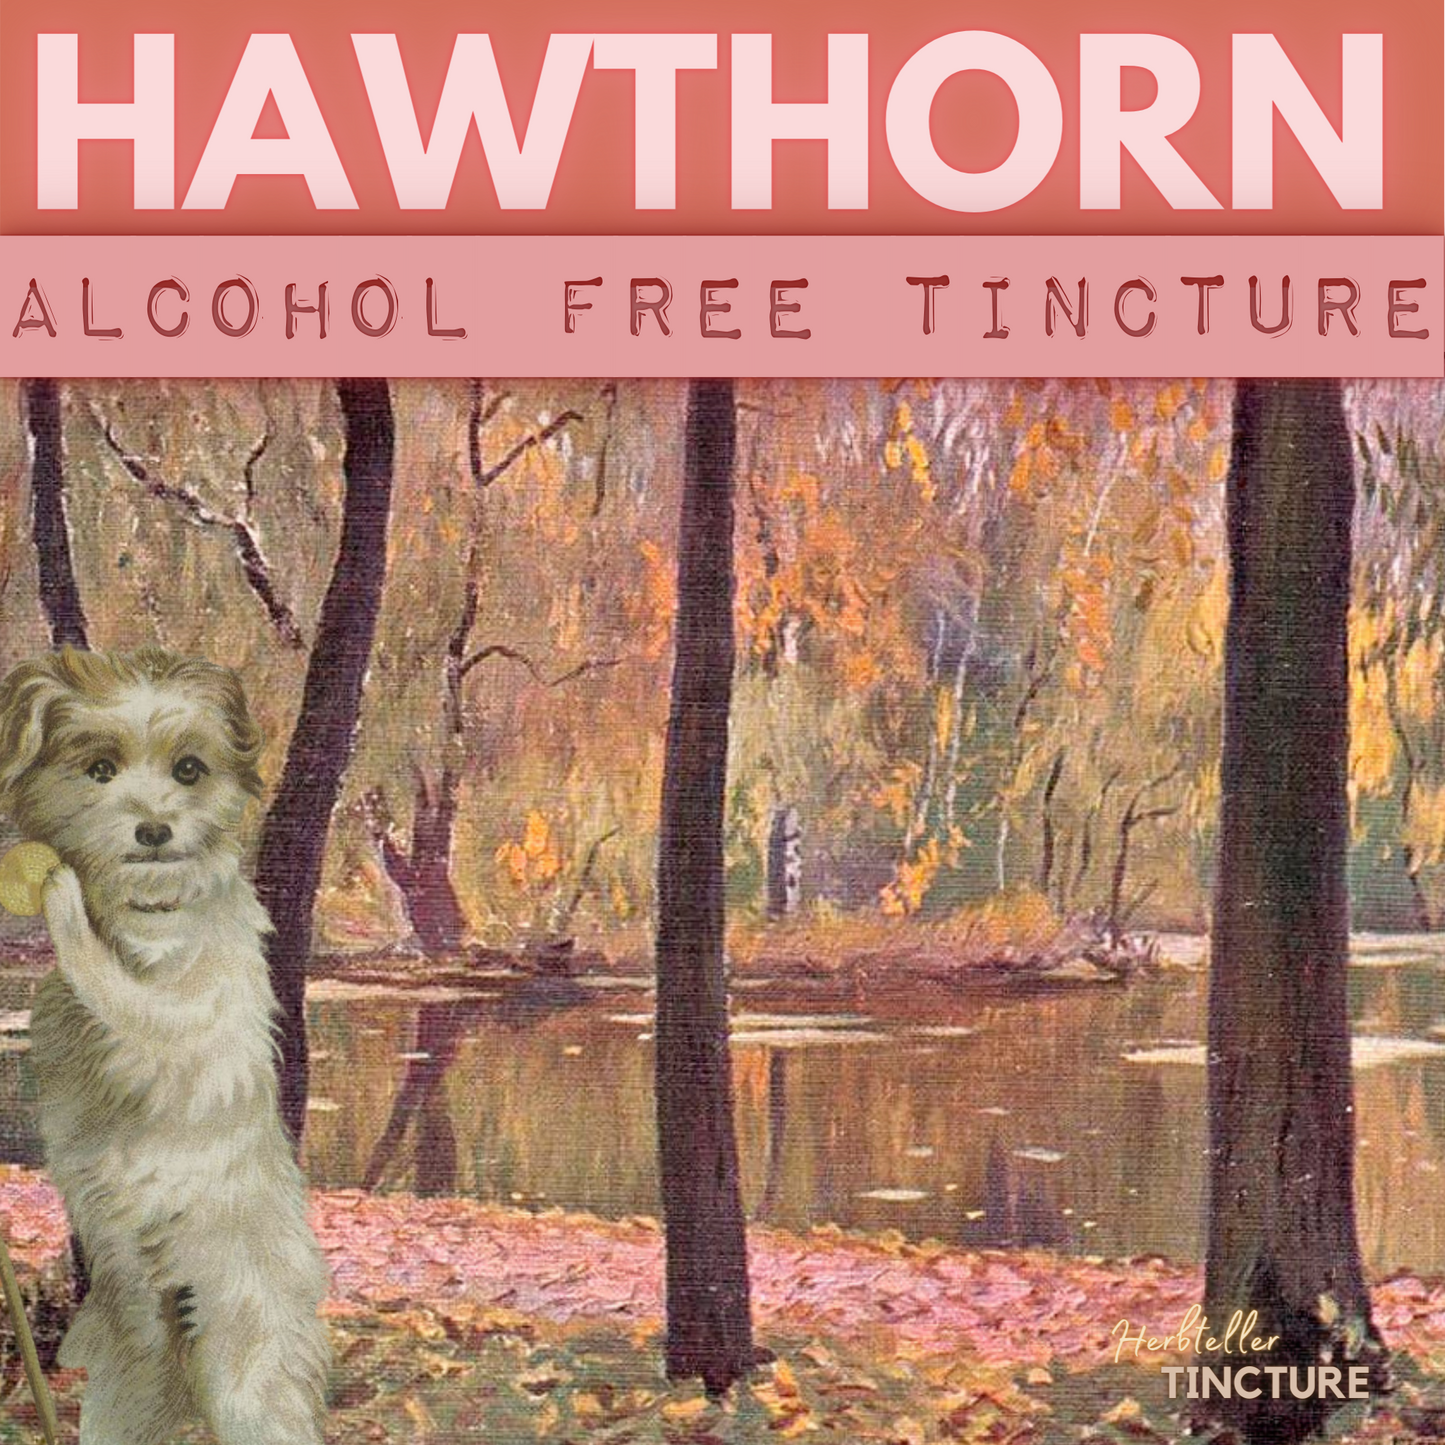 Hawthorn (May Blossom) Herbal Tincture (alcohol free)